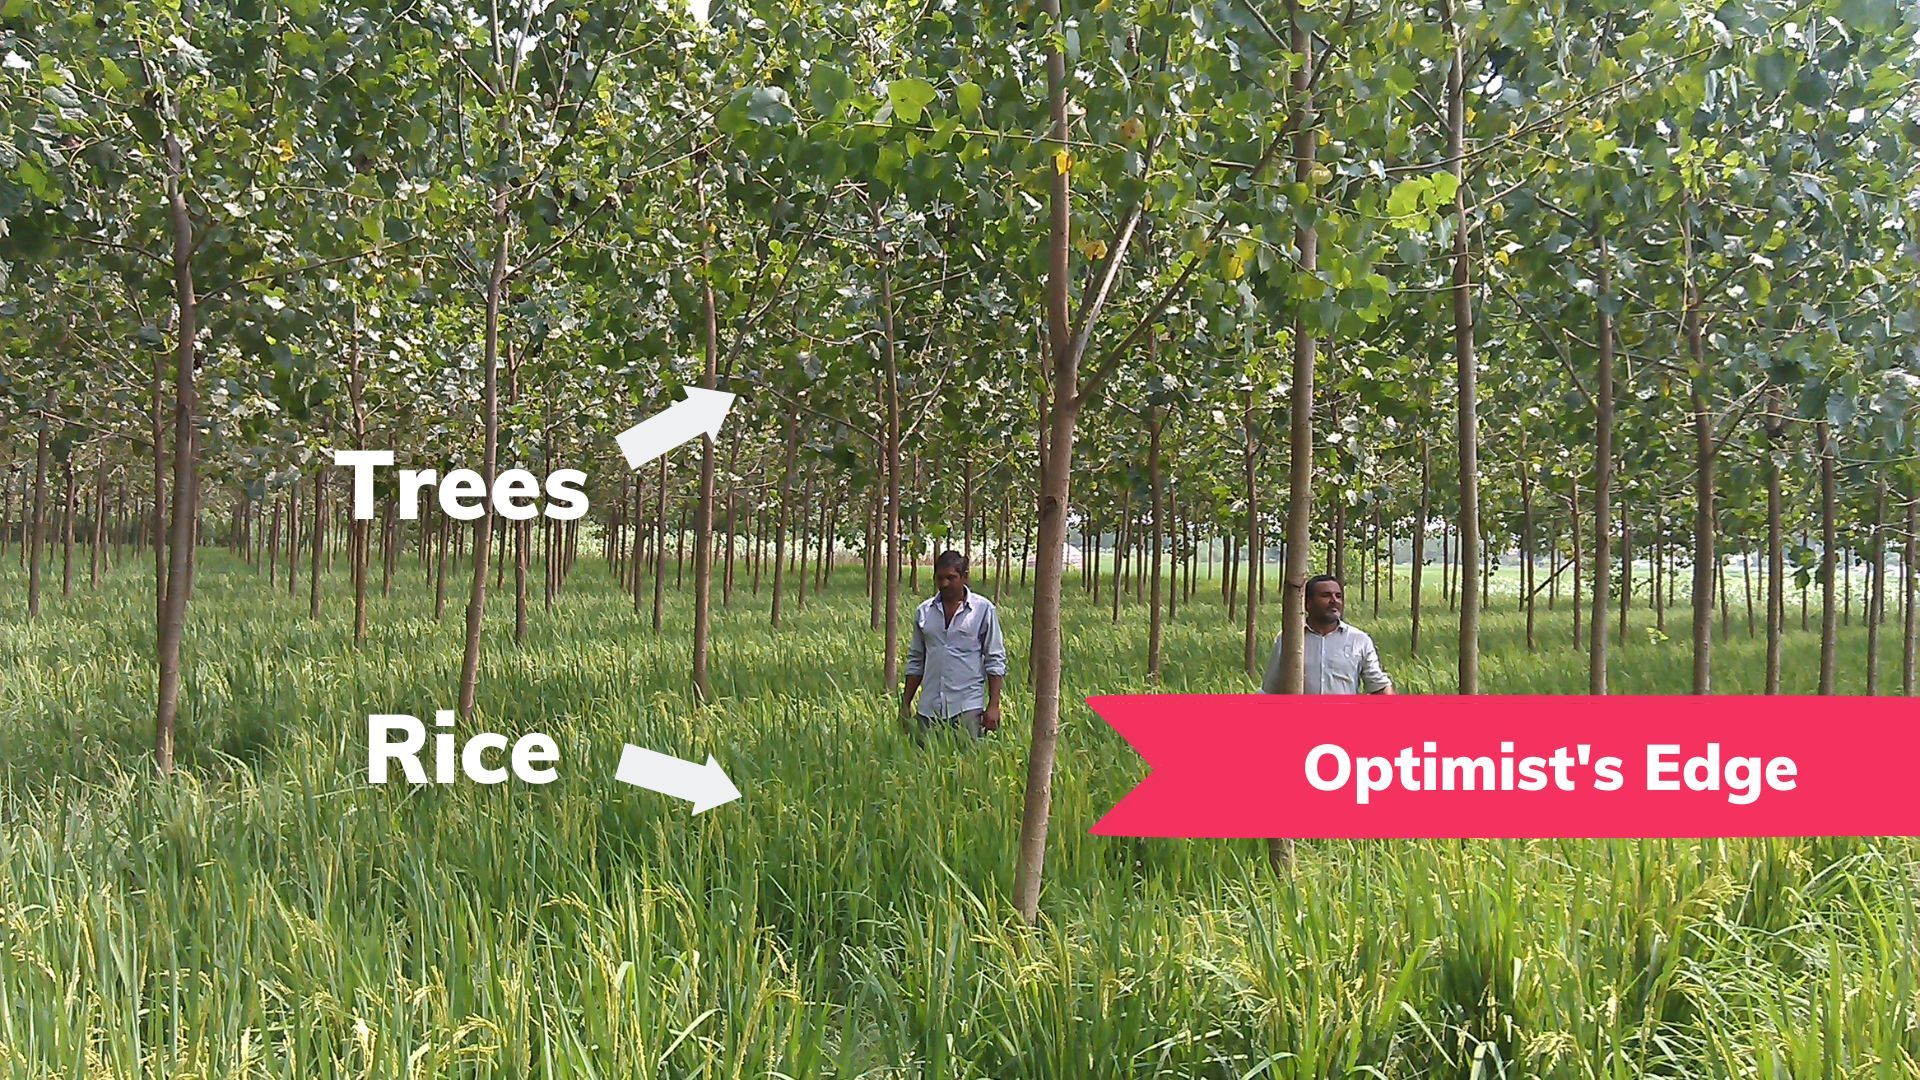 💡 Optimist's Edge: Trees and agriculture can be combined